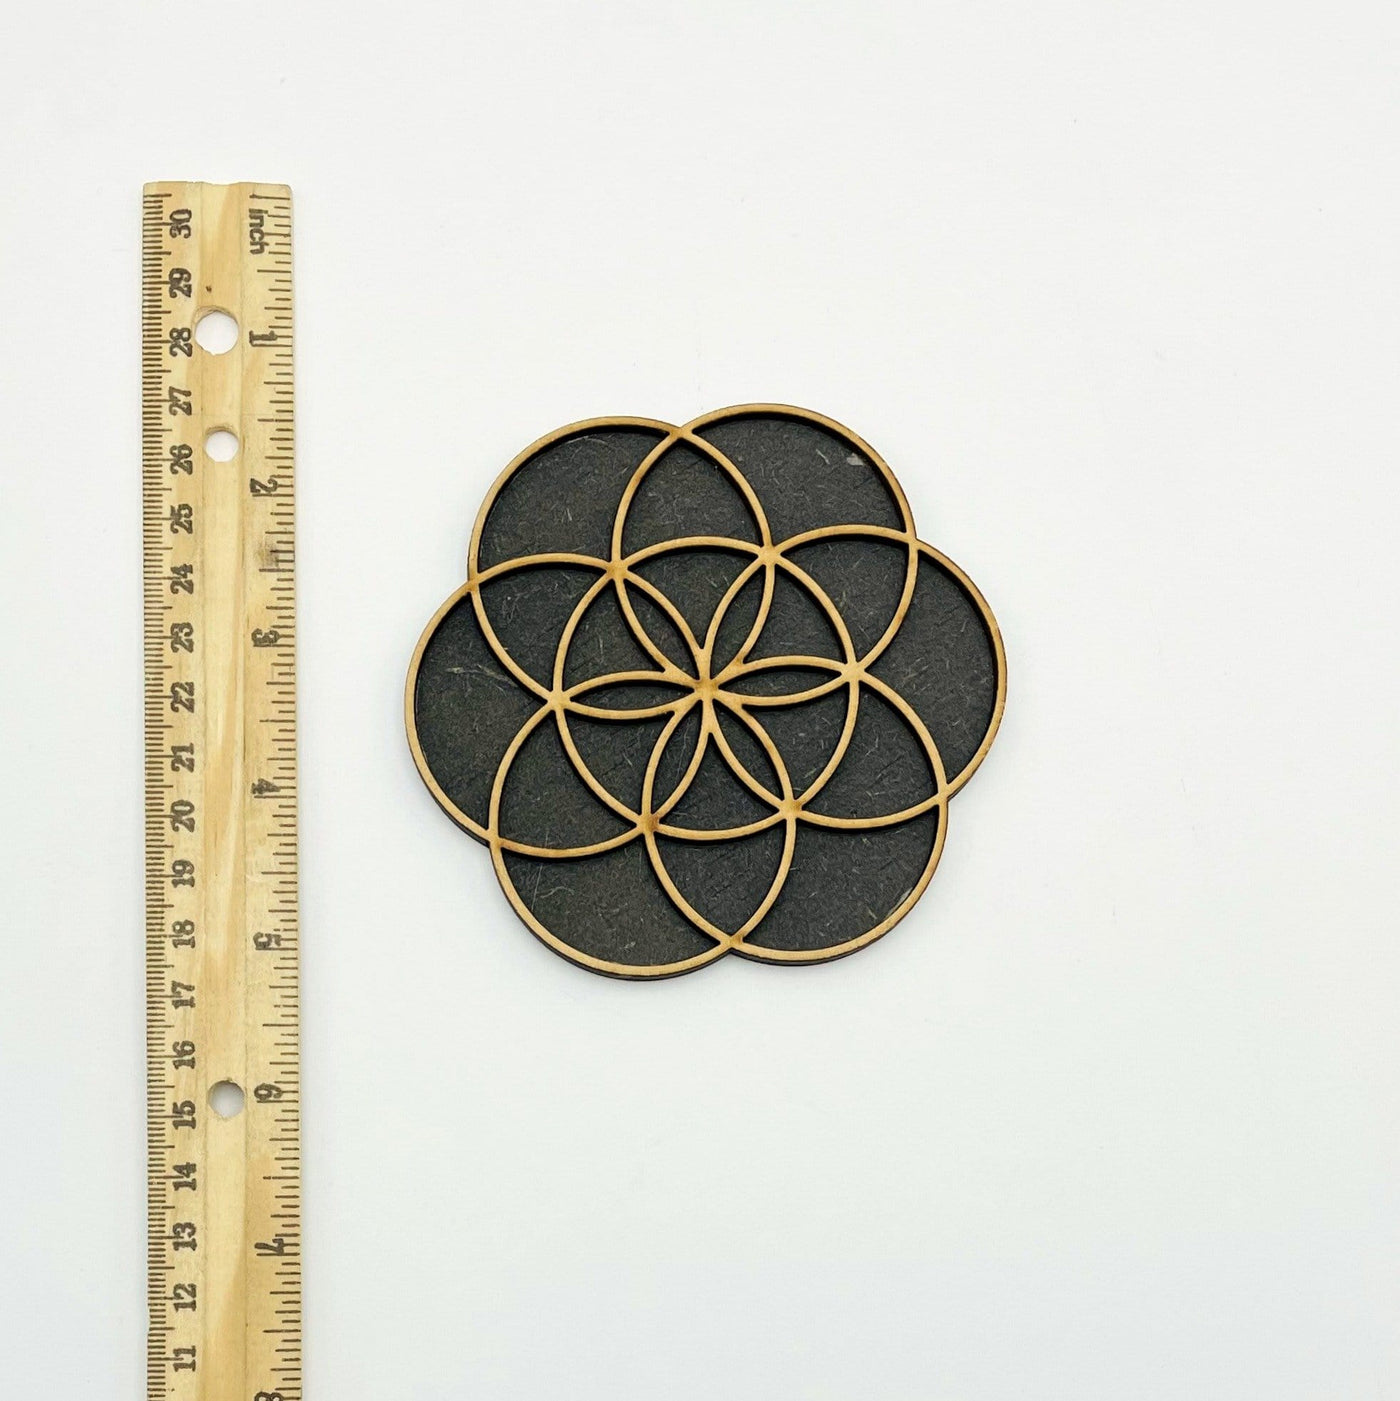 seed of life mini wooden grid with ruler for size reference